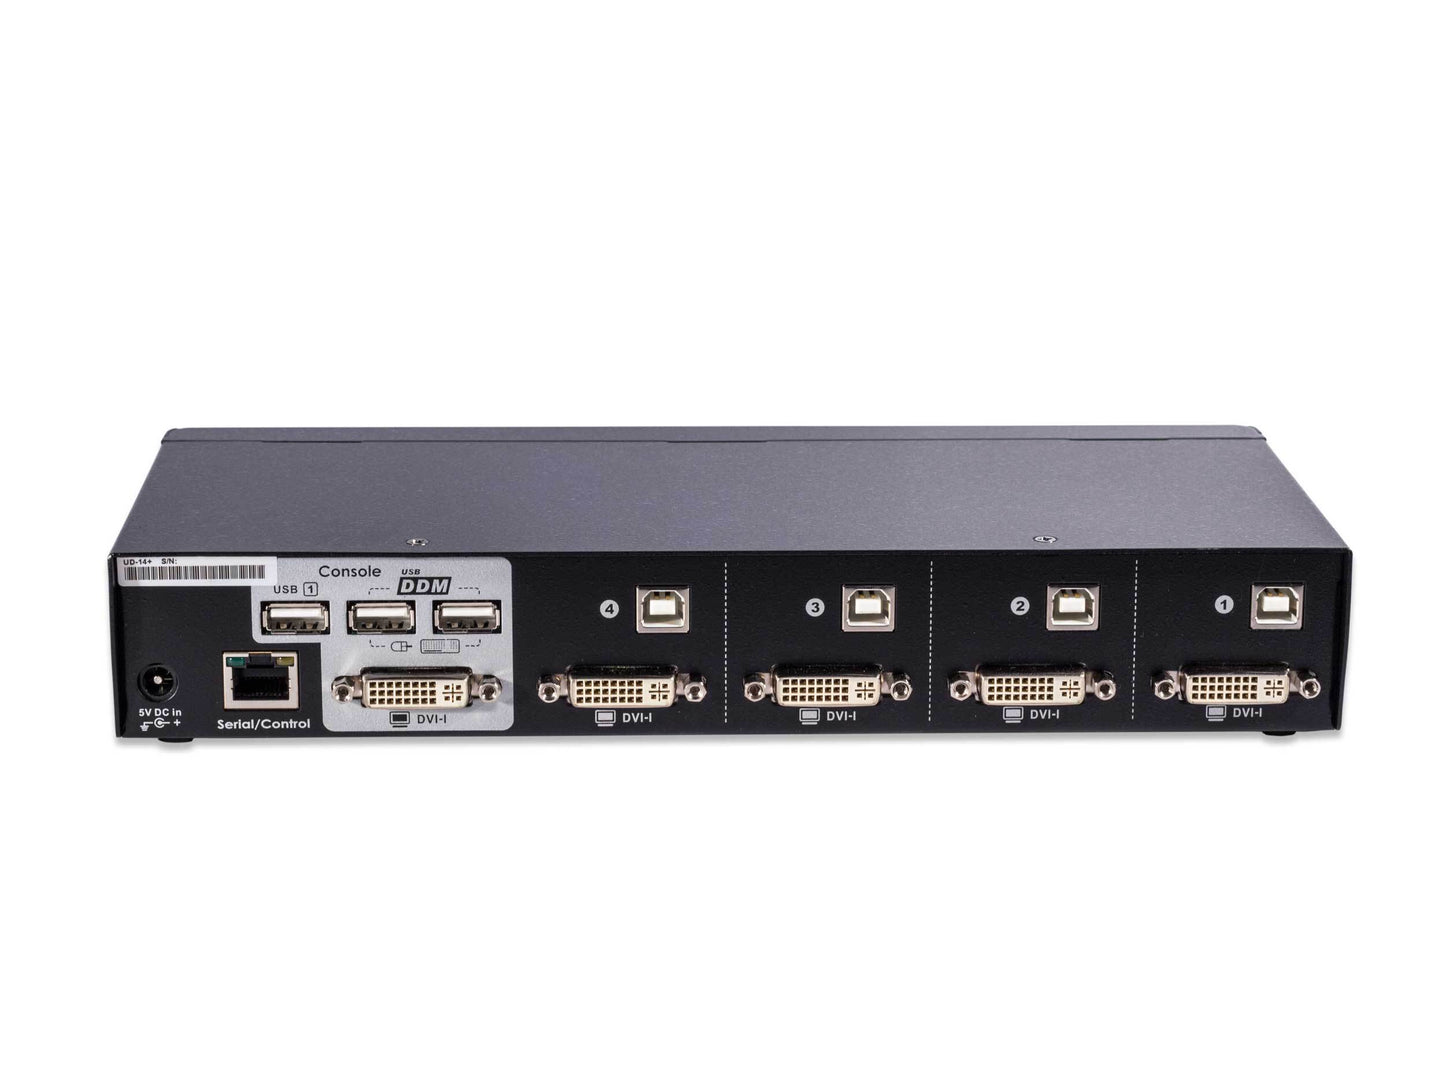 UD-14+ DVI-D KVM switch for One Monitor and Four Computers